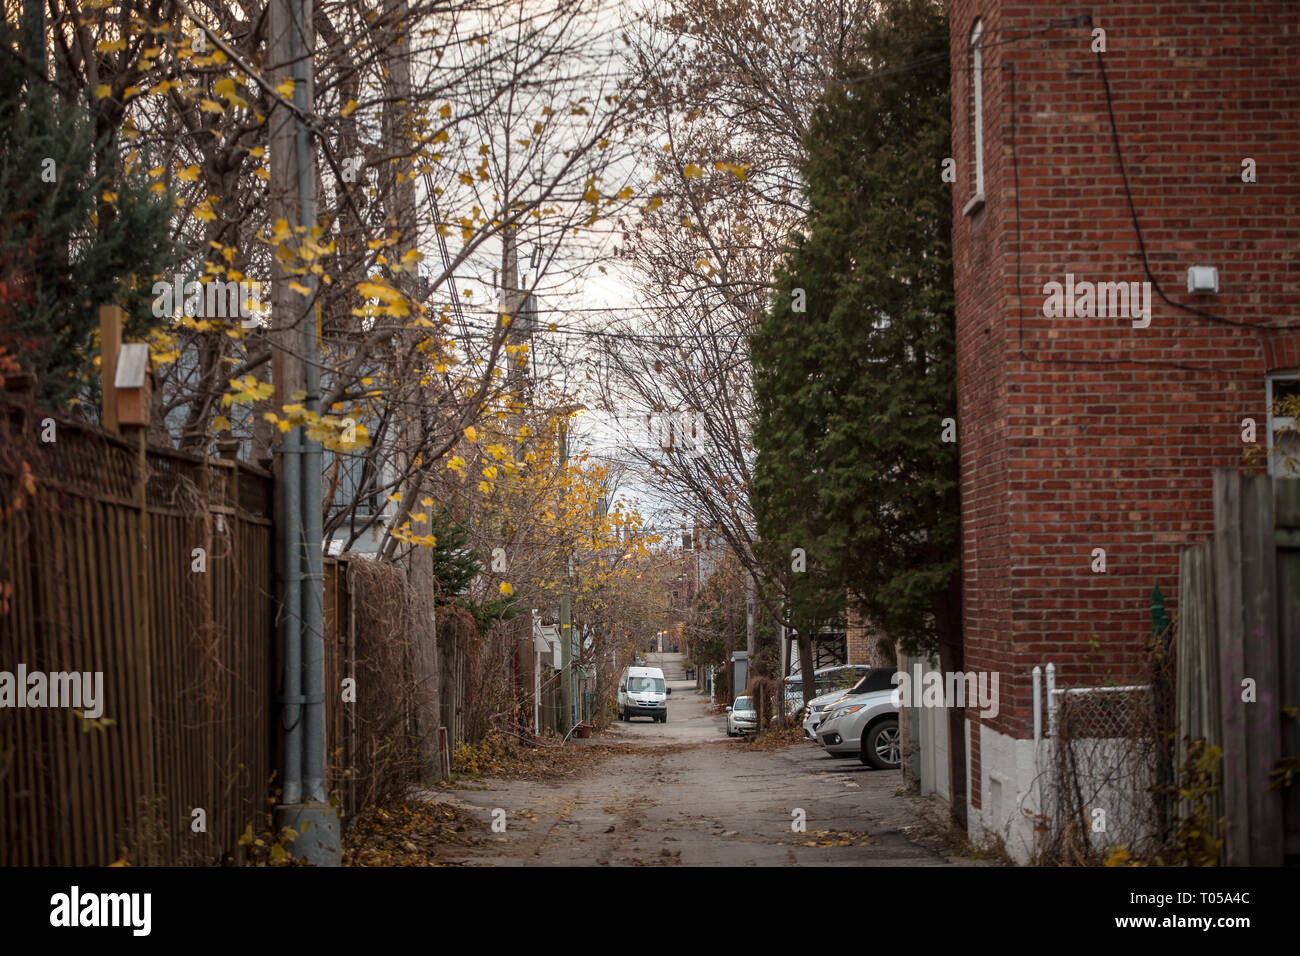 MONTREAL, CANADA - NOVEMBER 8, 2018: Dilapidated typical north American residential street in autumn in Montreal, Quebec, during a rainy day, with car Stock Photo